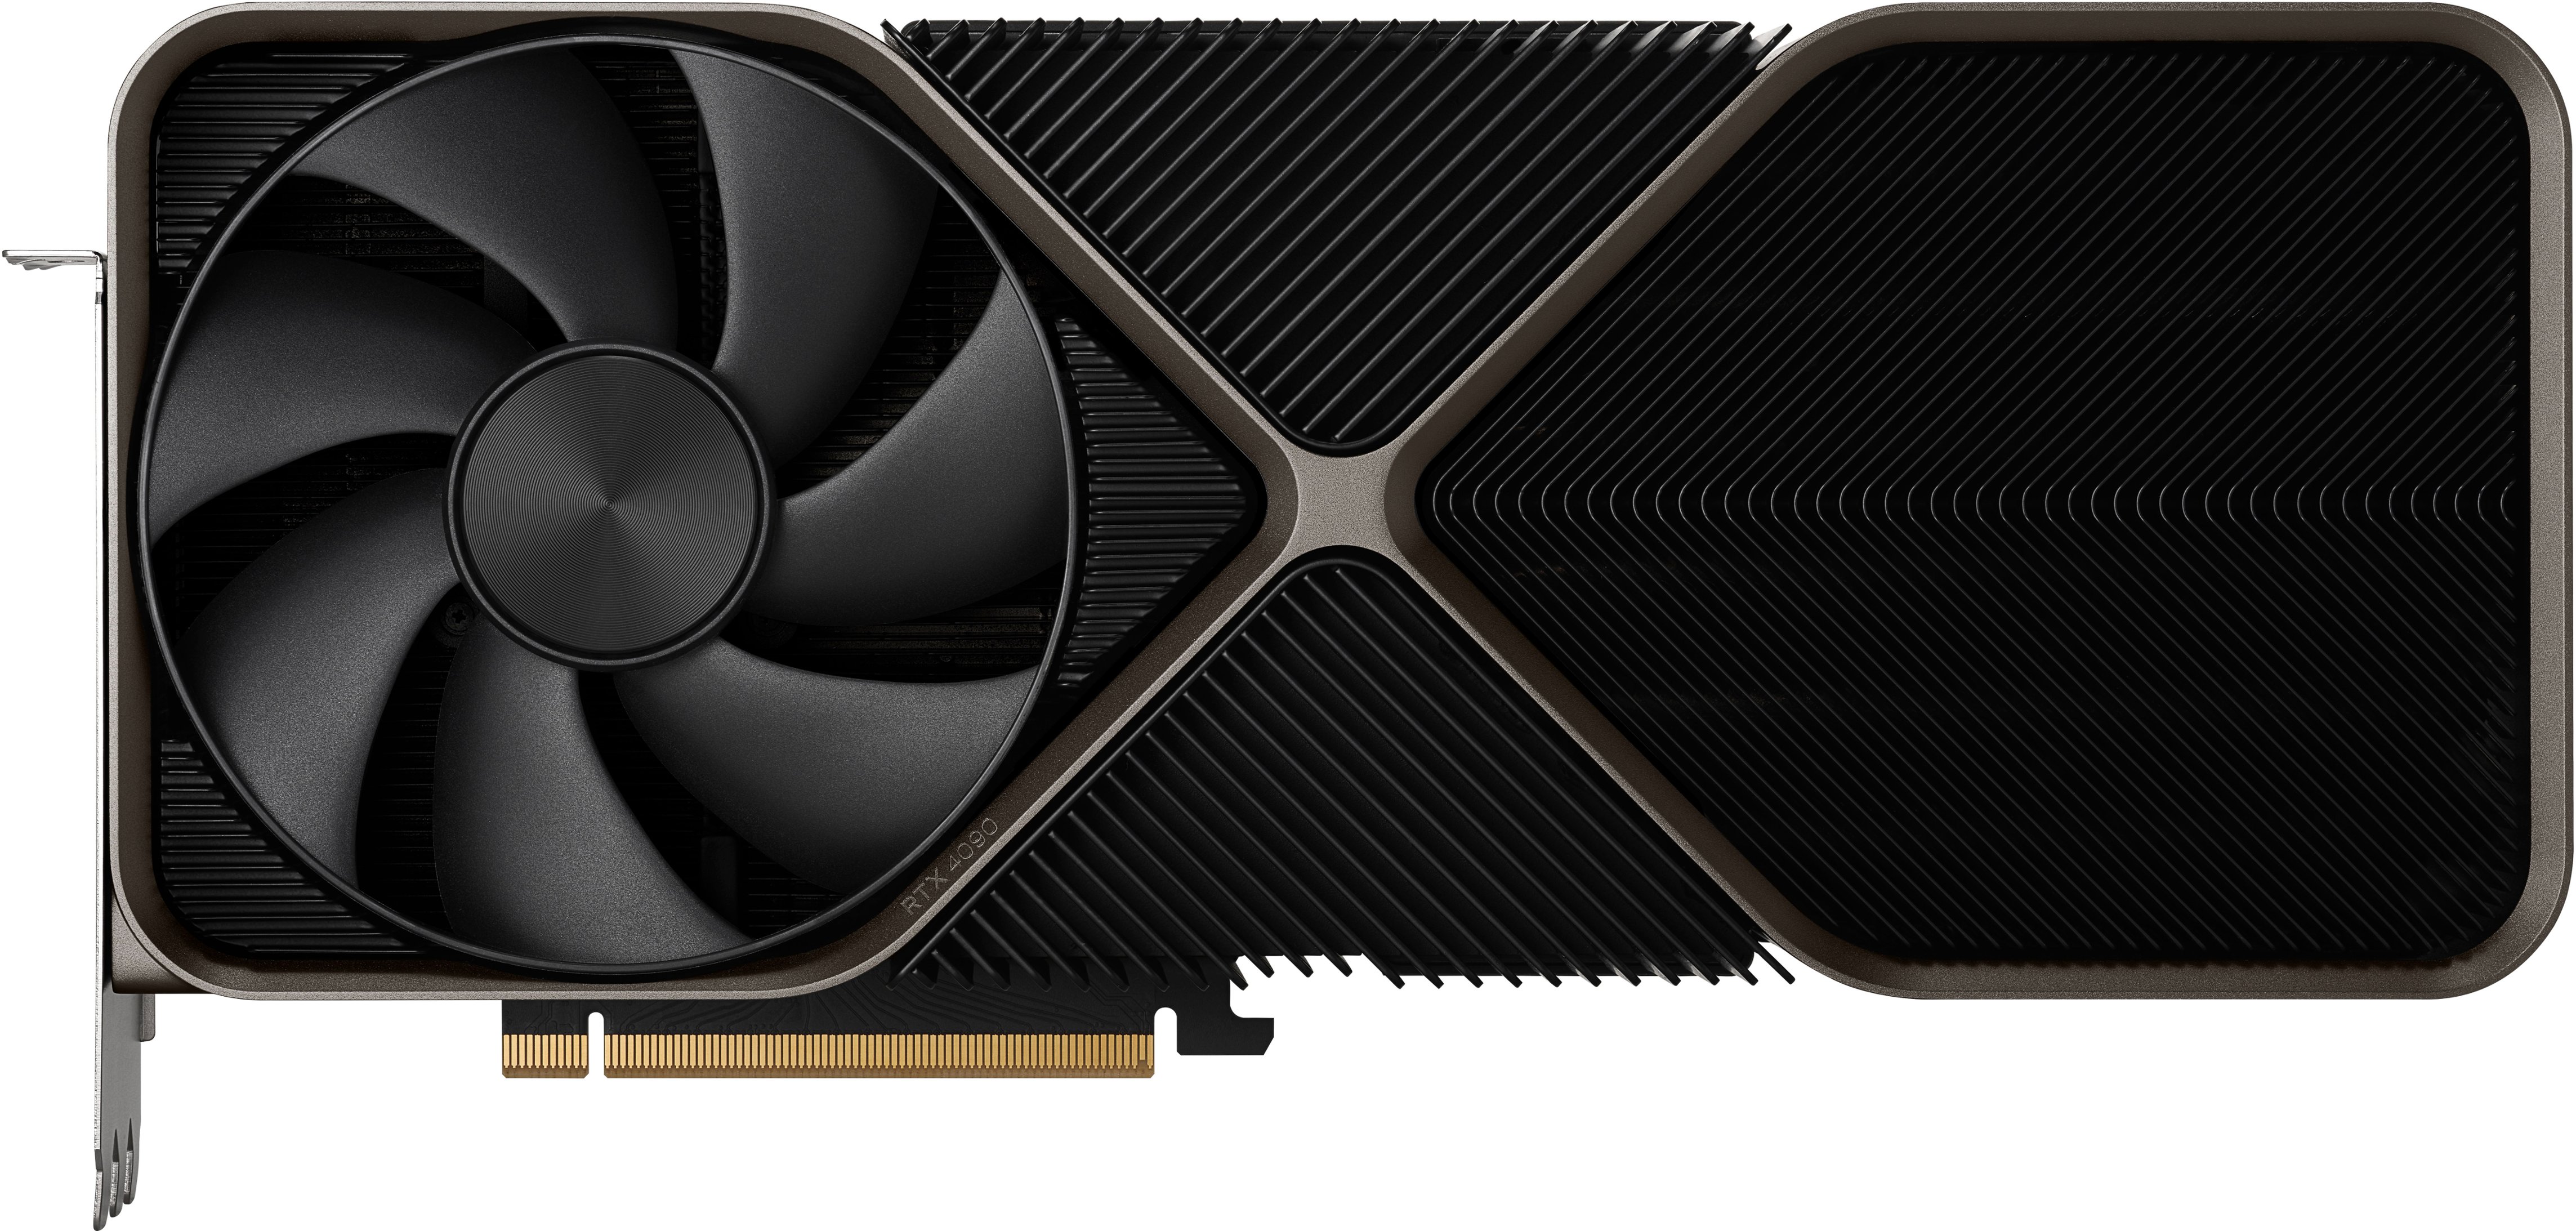 Nvidia GeForce RTX 4090 GPU prices might soon be on the rise